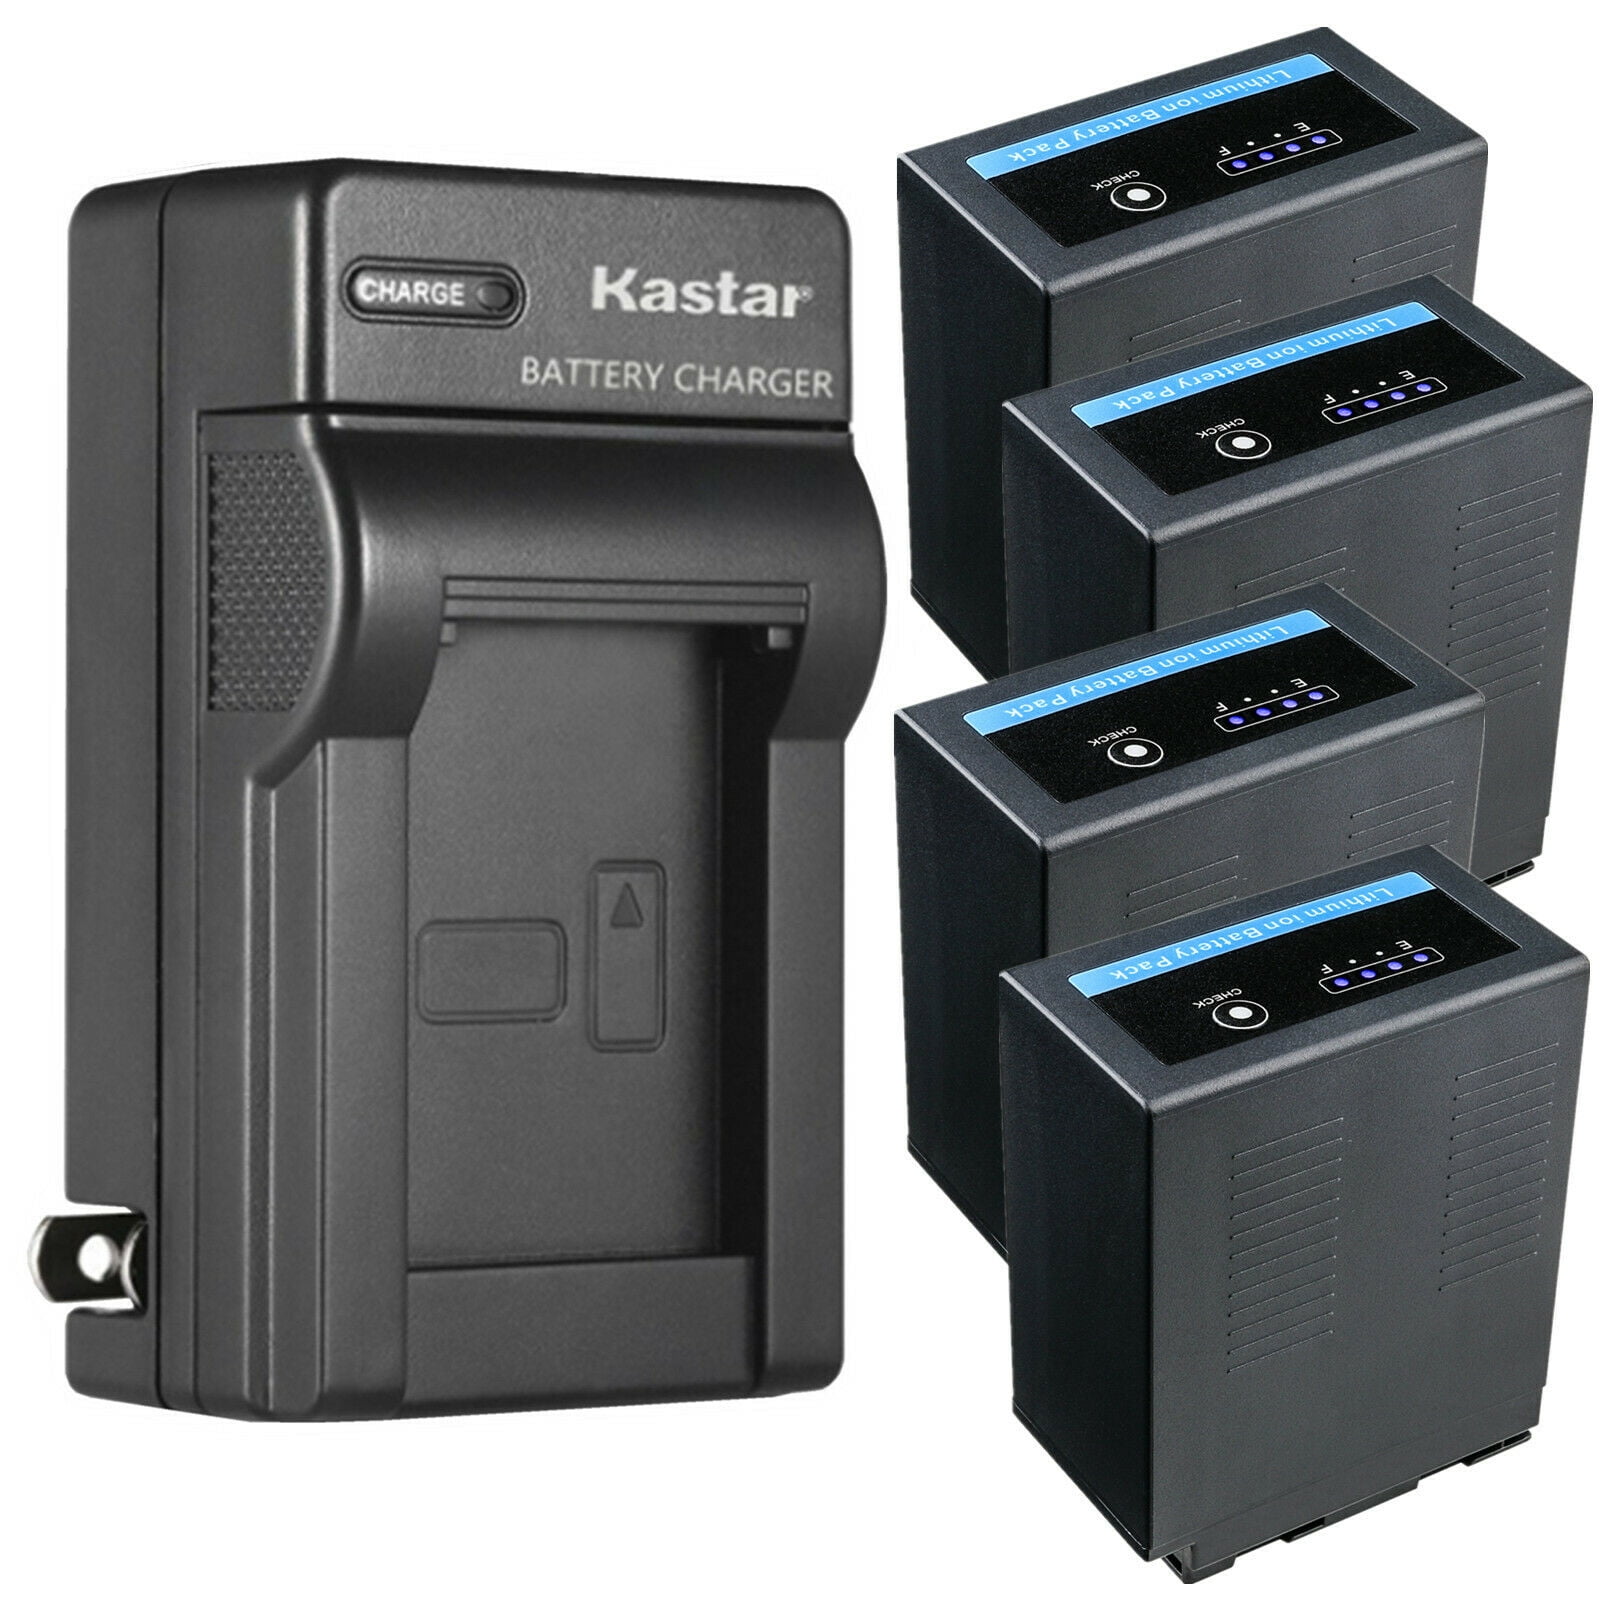 Kastar 4-Pack Battery and AC Wall Charger Replacement for